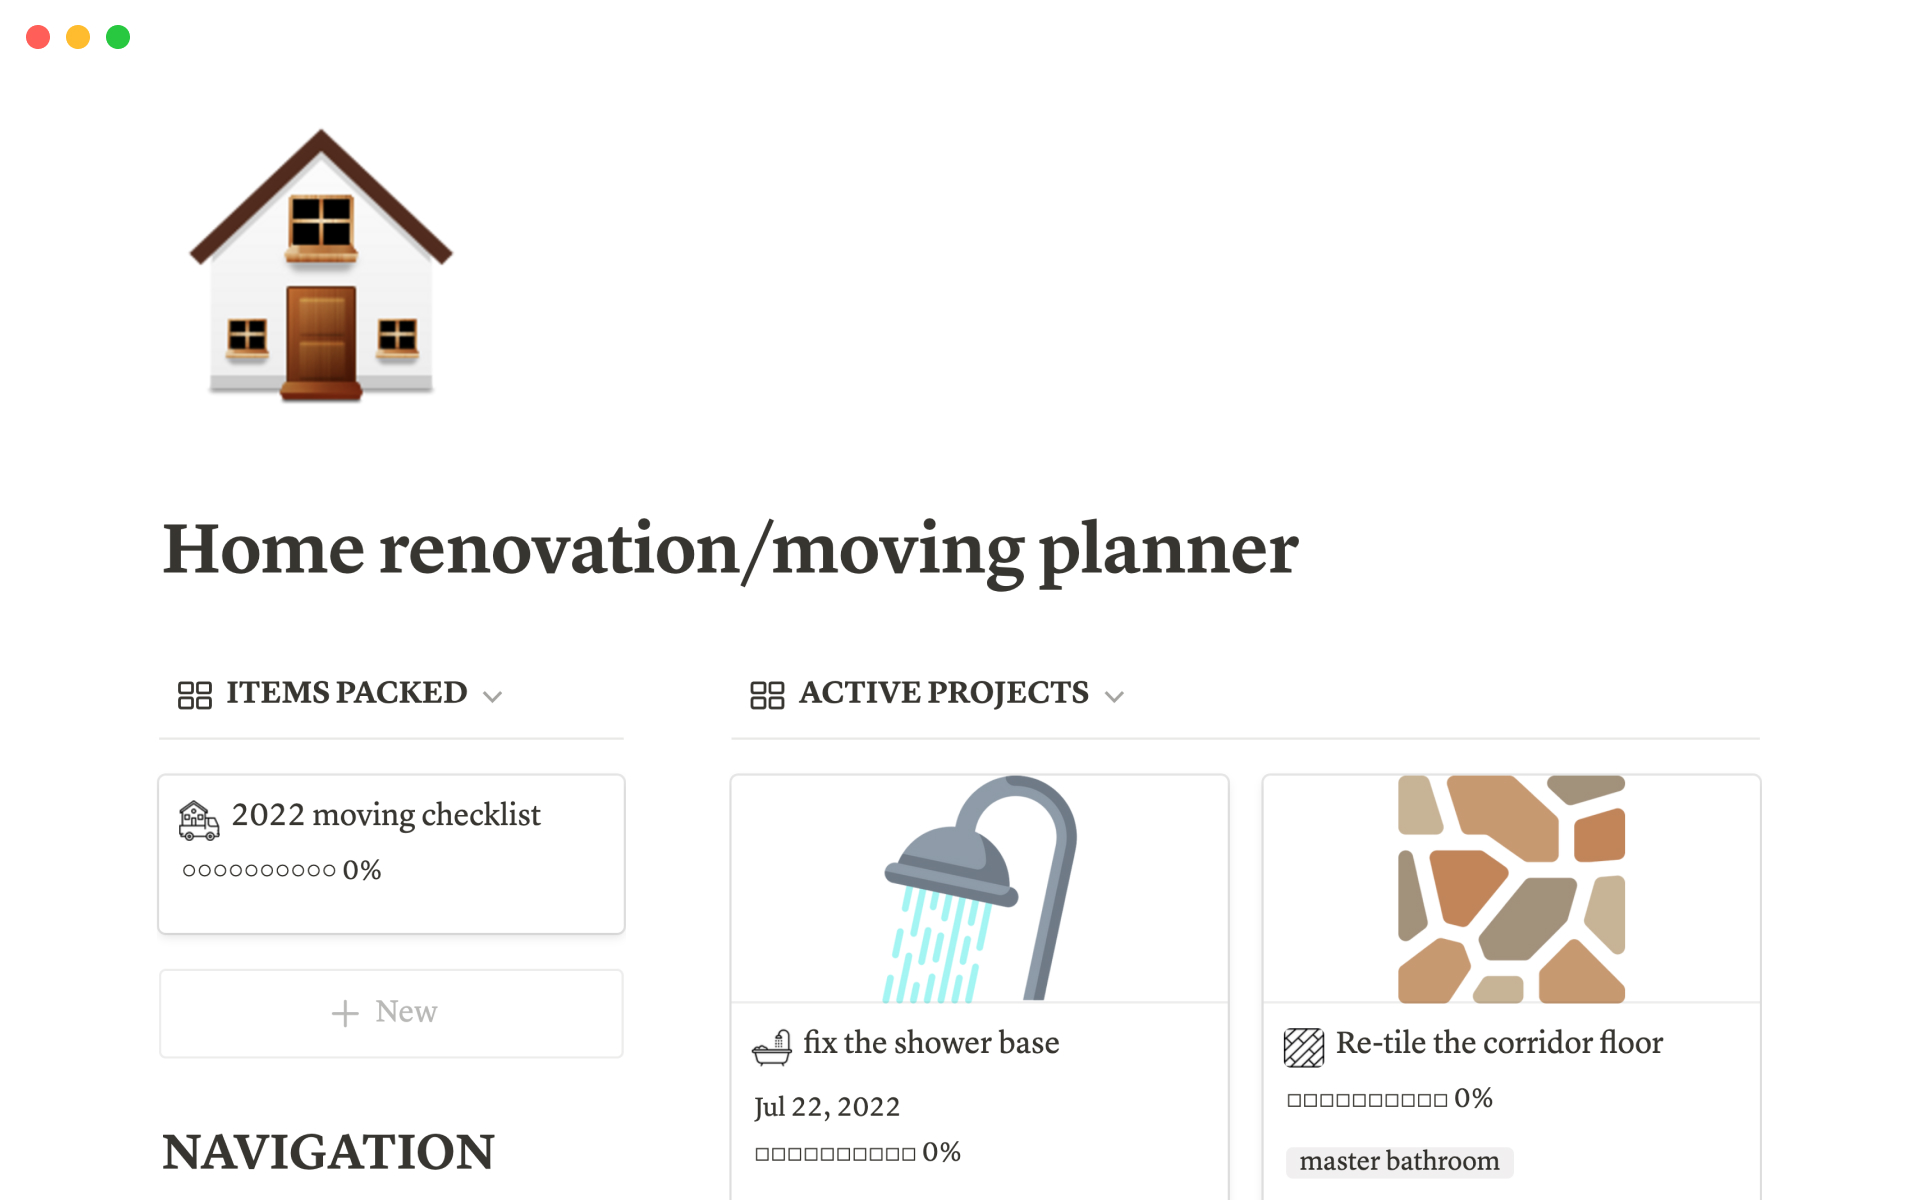 Plan, track, and stay on top budgets for your home remodel projects or moving plans.